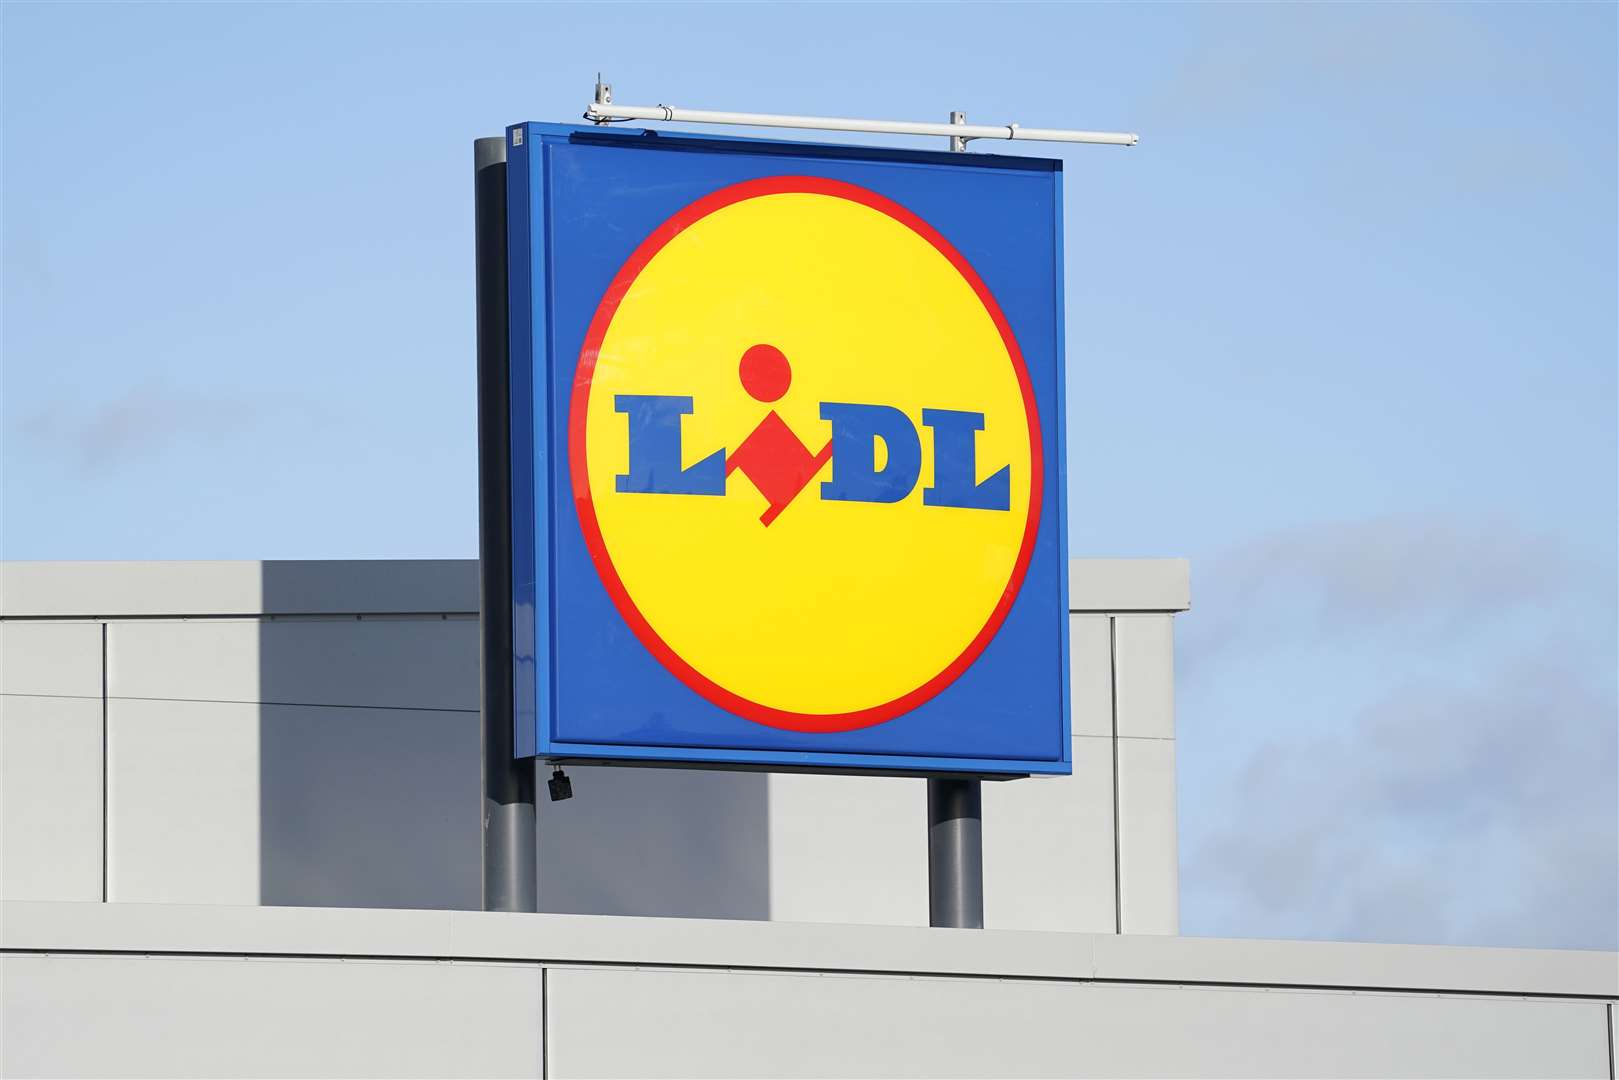 Lidl uses a yellow circle in its main logo (Andrew Matthews/PA)